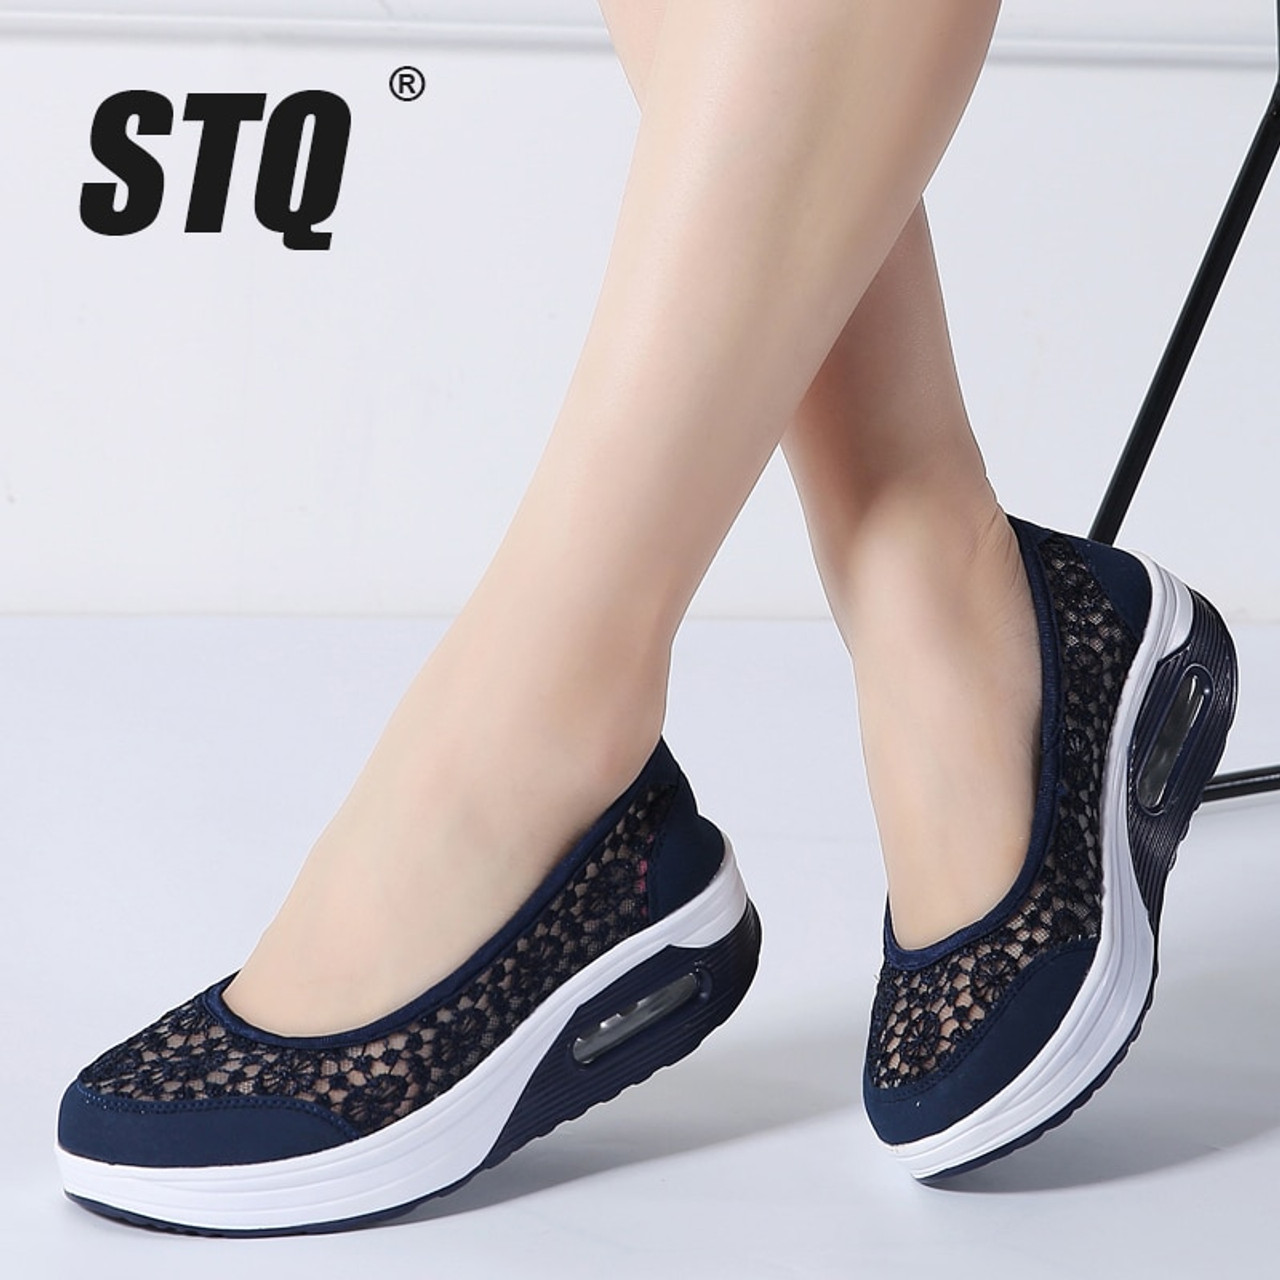 summer casual shoes womens